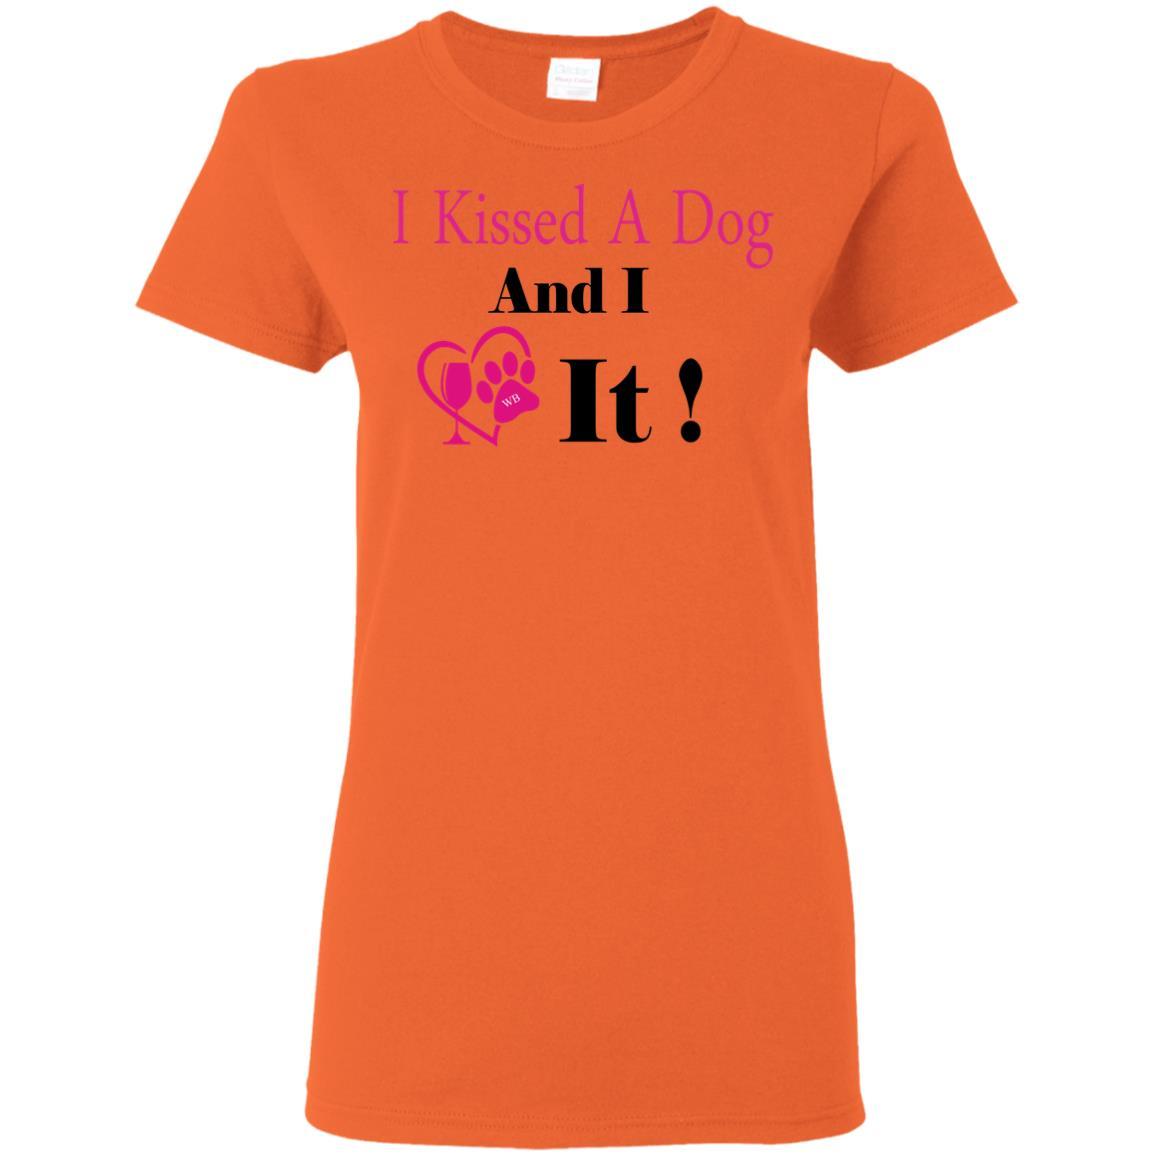 T-Shirts Orange / S WineyBitches.co "I Kissed A Dog And I Loved It:" Ladies' 5.3 oz. T-Shirt WineyBitchesCo